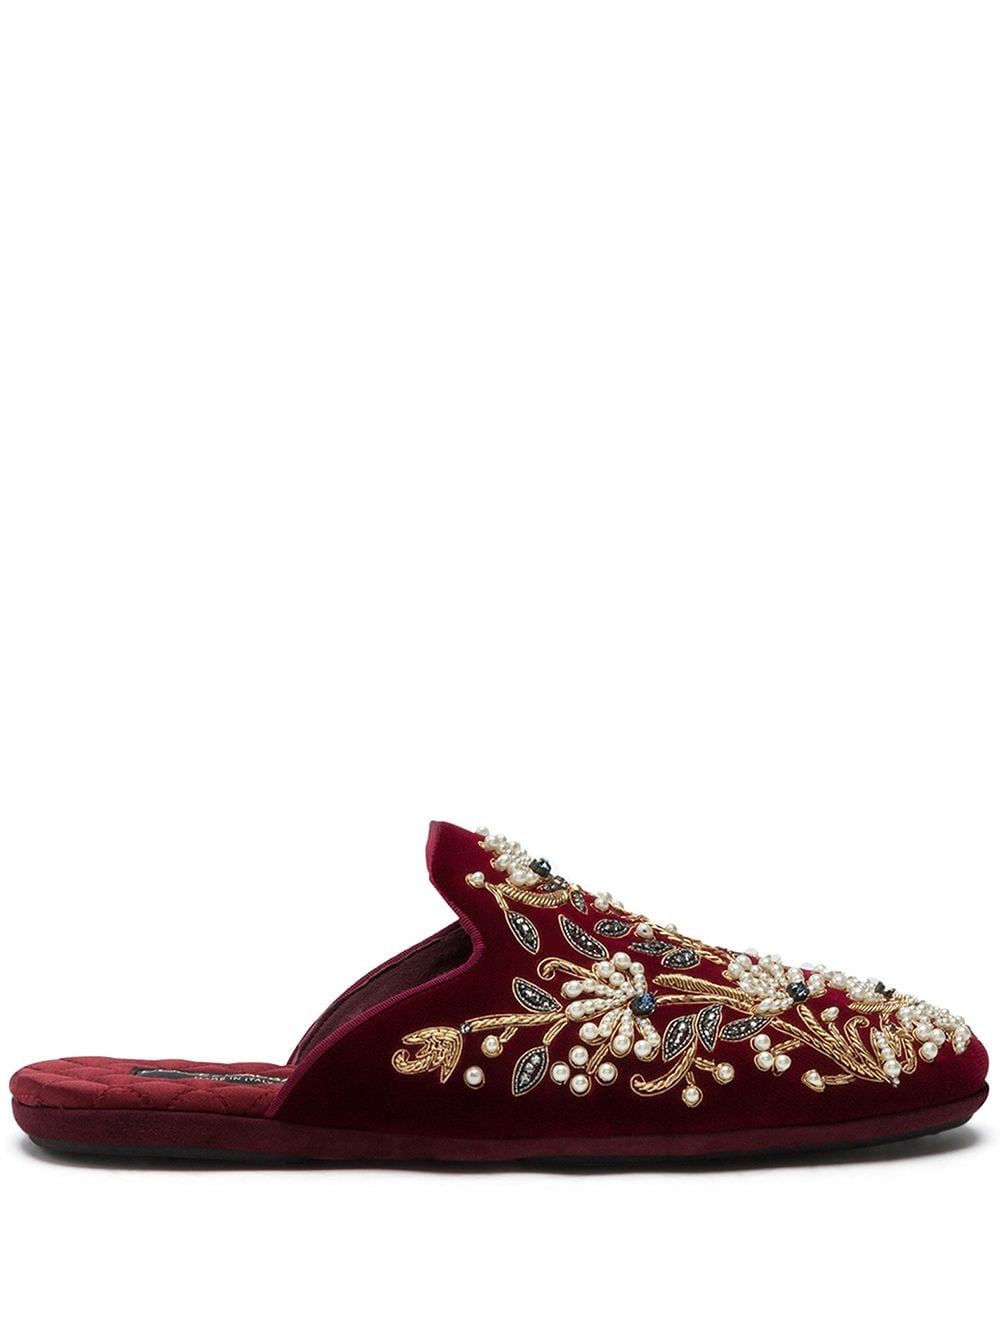 Dolce & Gabbana Bead-embroidered Slippers In Red